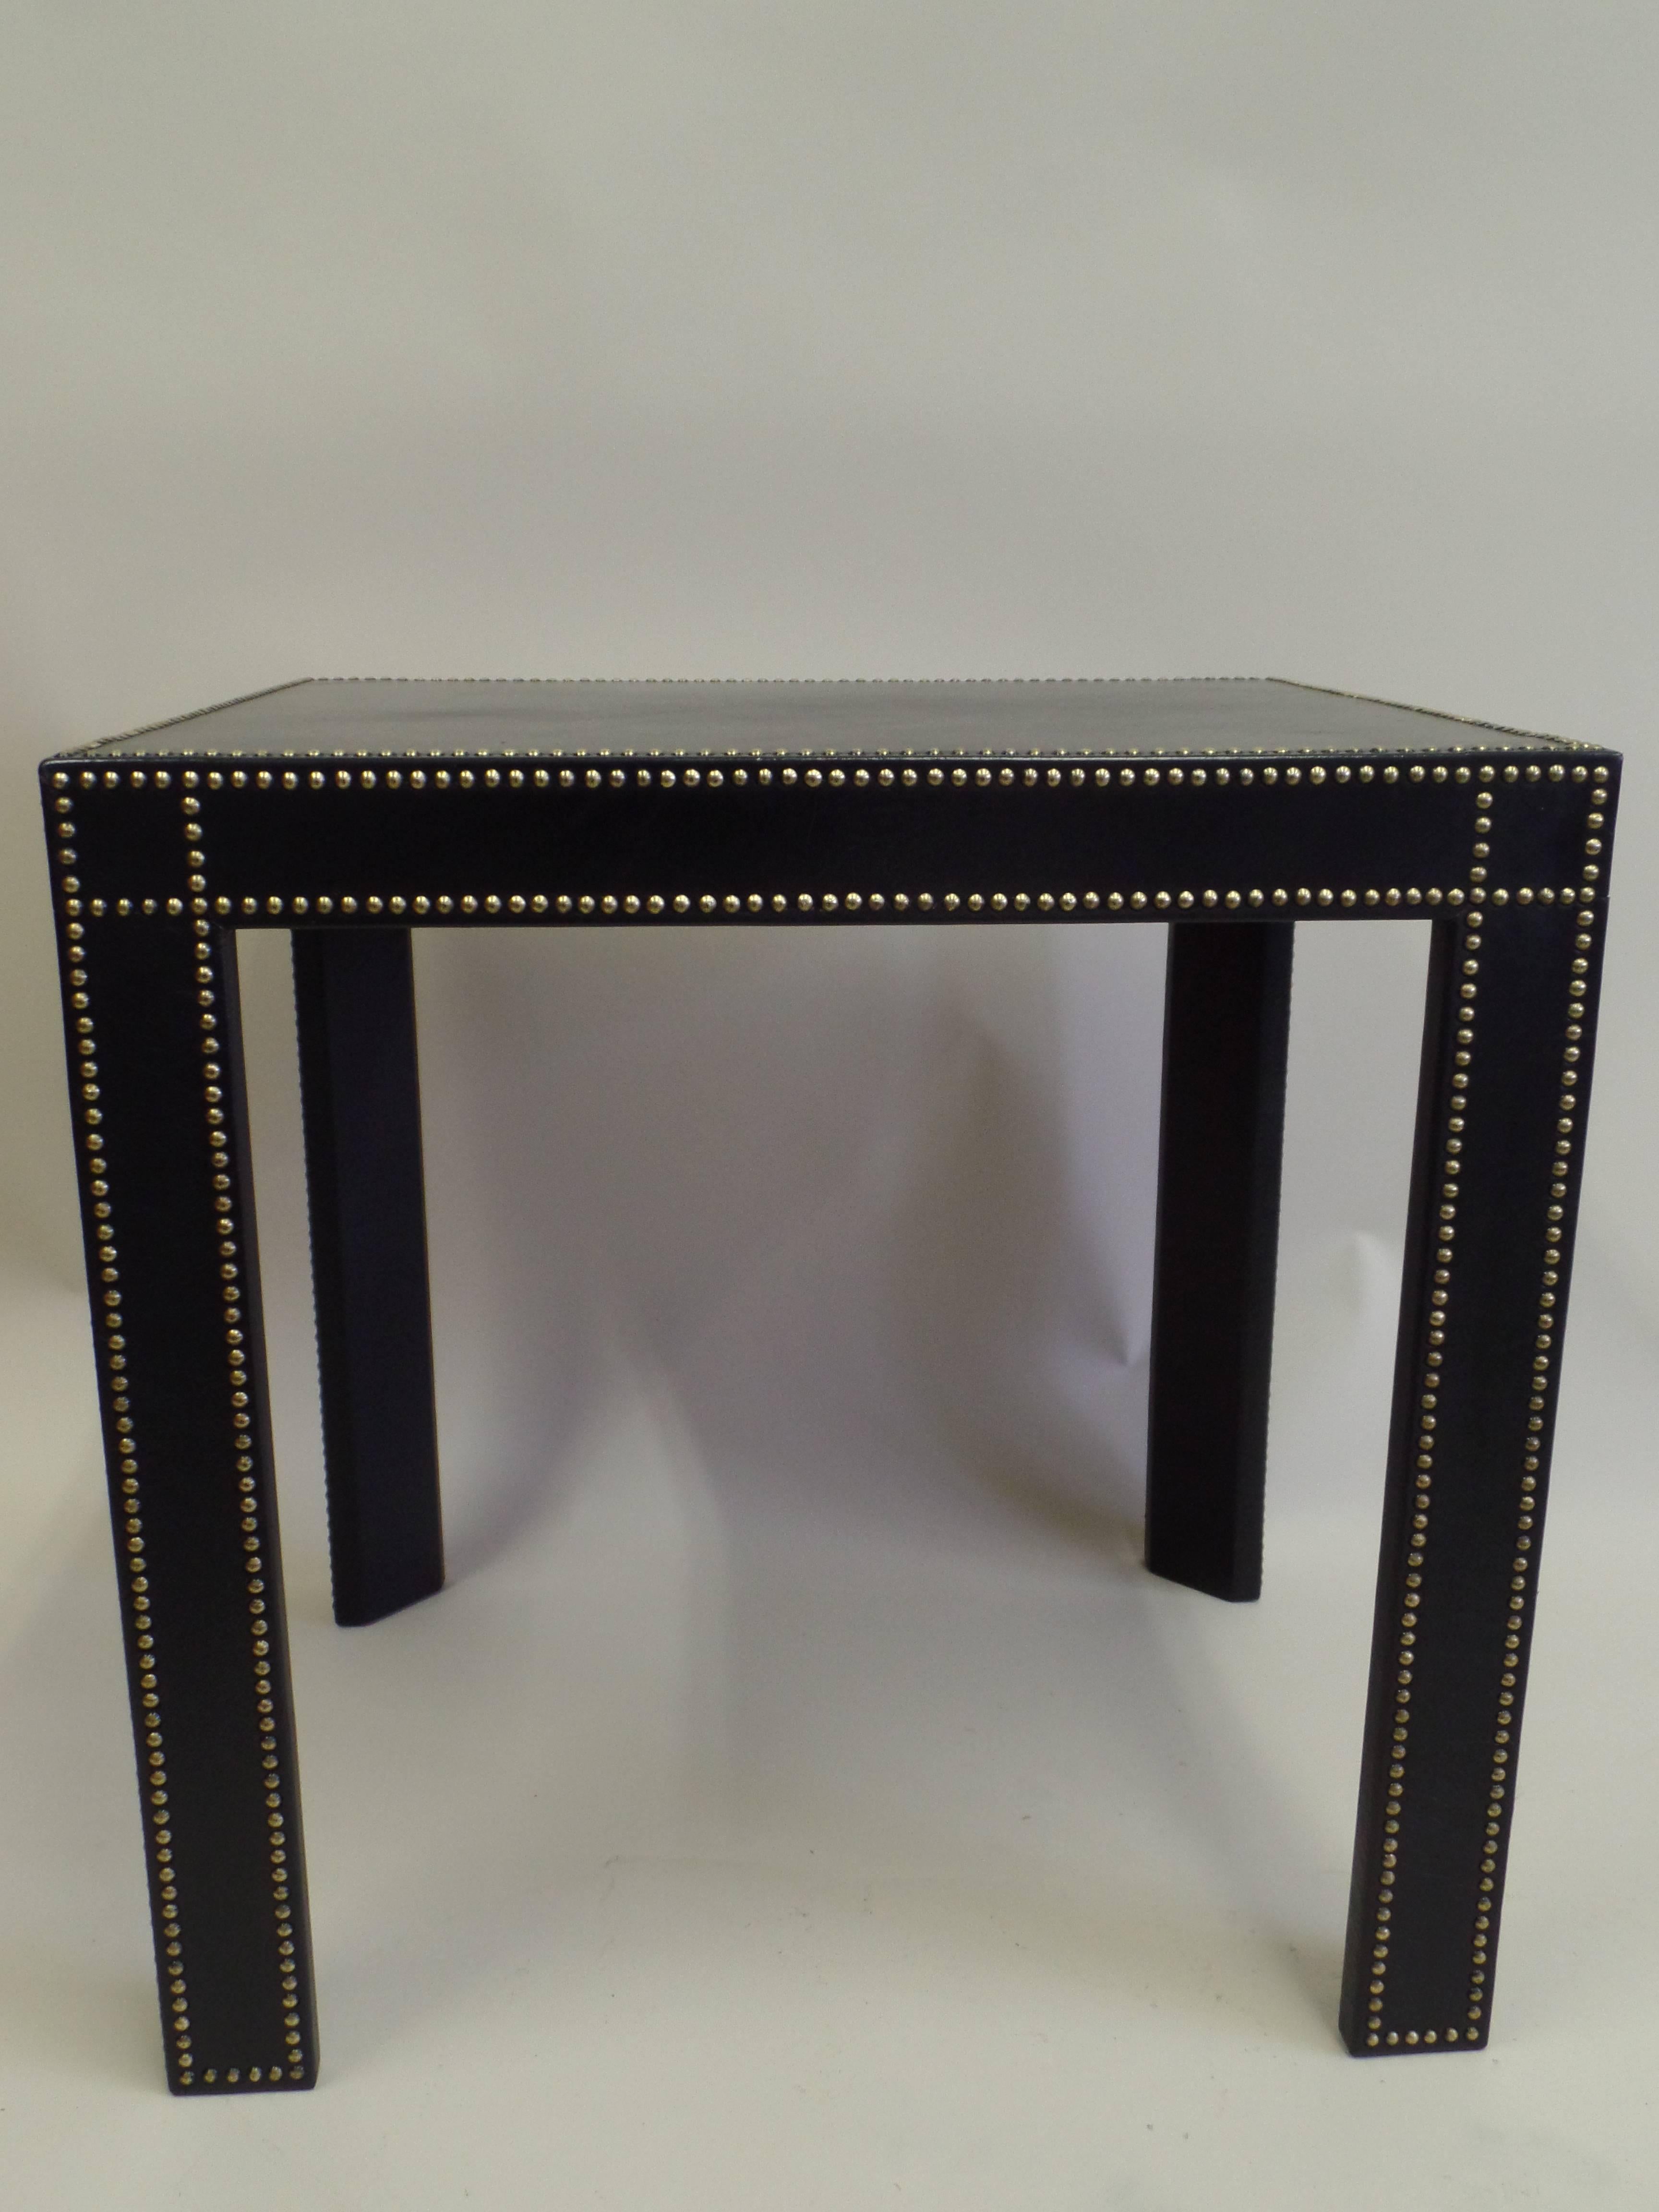 An elegant pair of French Mid-Century Modern Neoclassical style black leather studded side tables / nightstands attributed to the French artist, Pierre Lottier. The tables are rectangular and present serene, minimalist forms and lines. They have